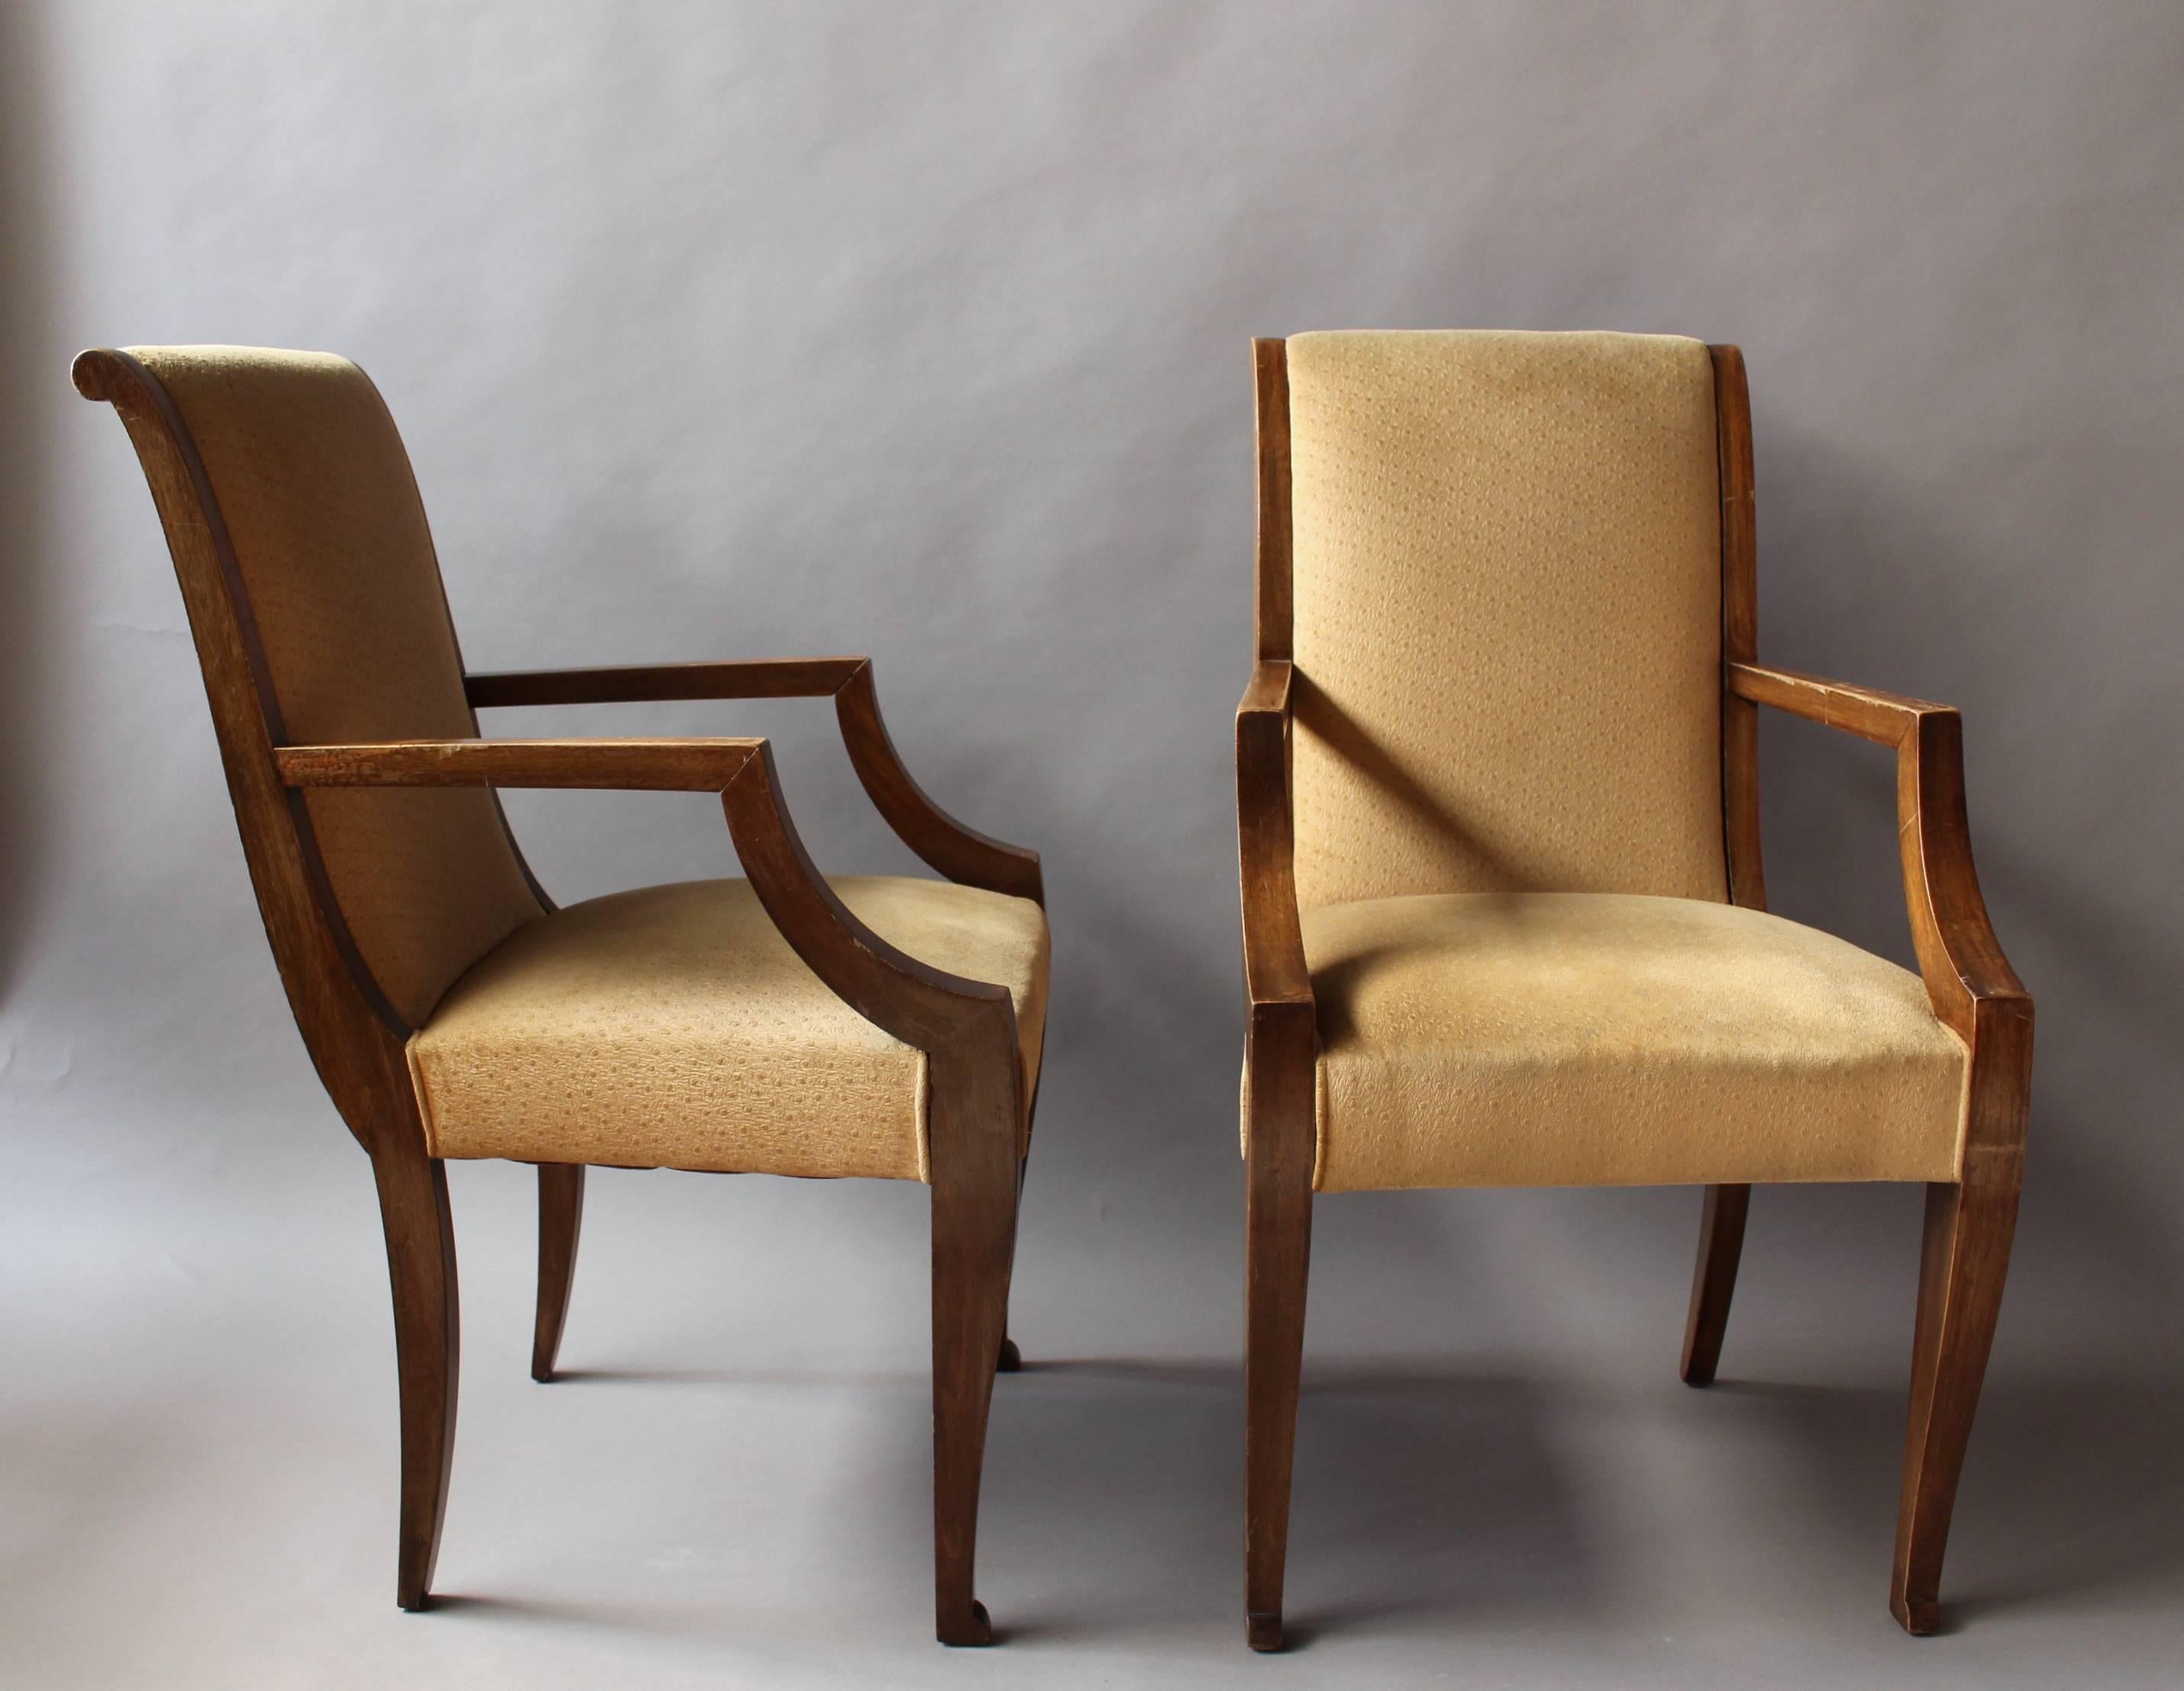 Four Fine French Art Deco Neoclassical walnut bridge armchairs.
Price is chair.